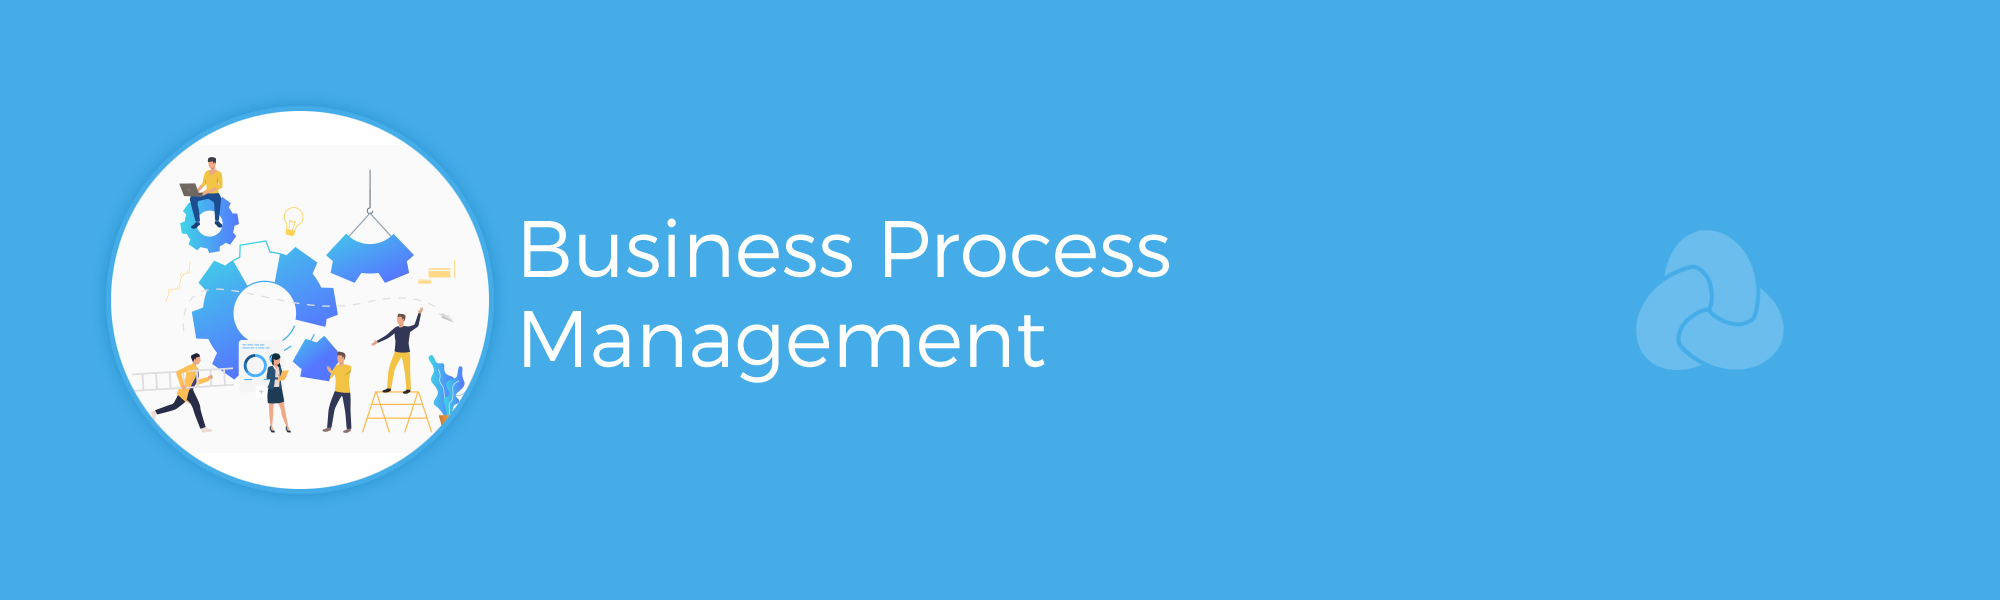 Business Process Management - Zanybh Consulting Services Pvt. Ltd.